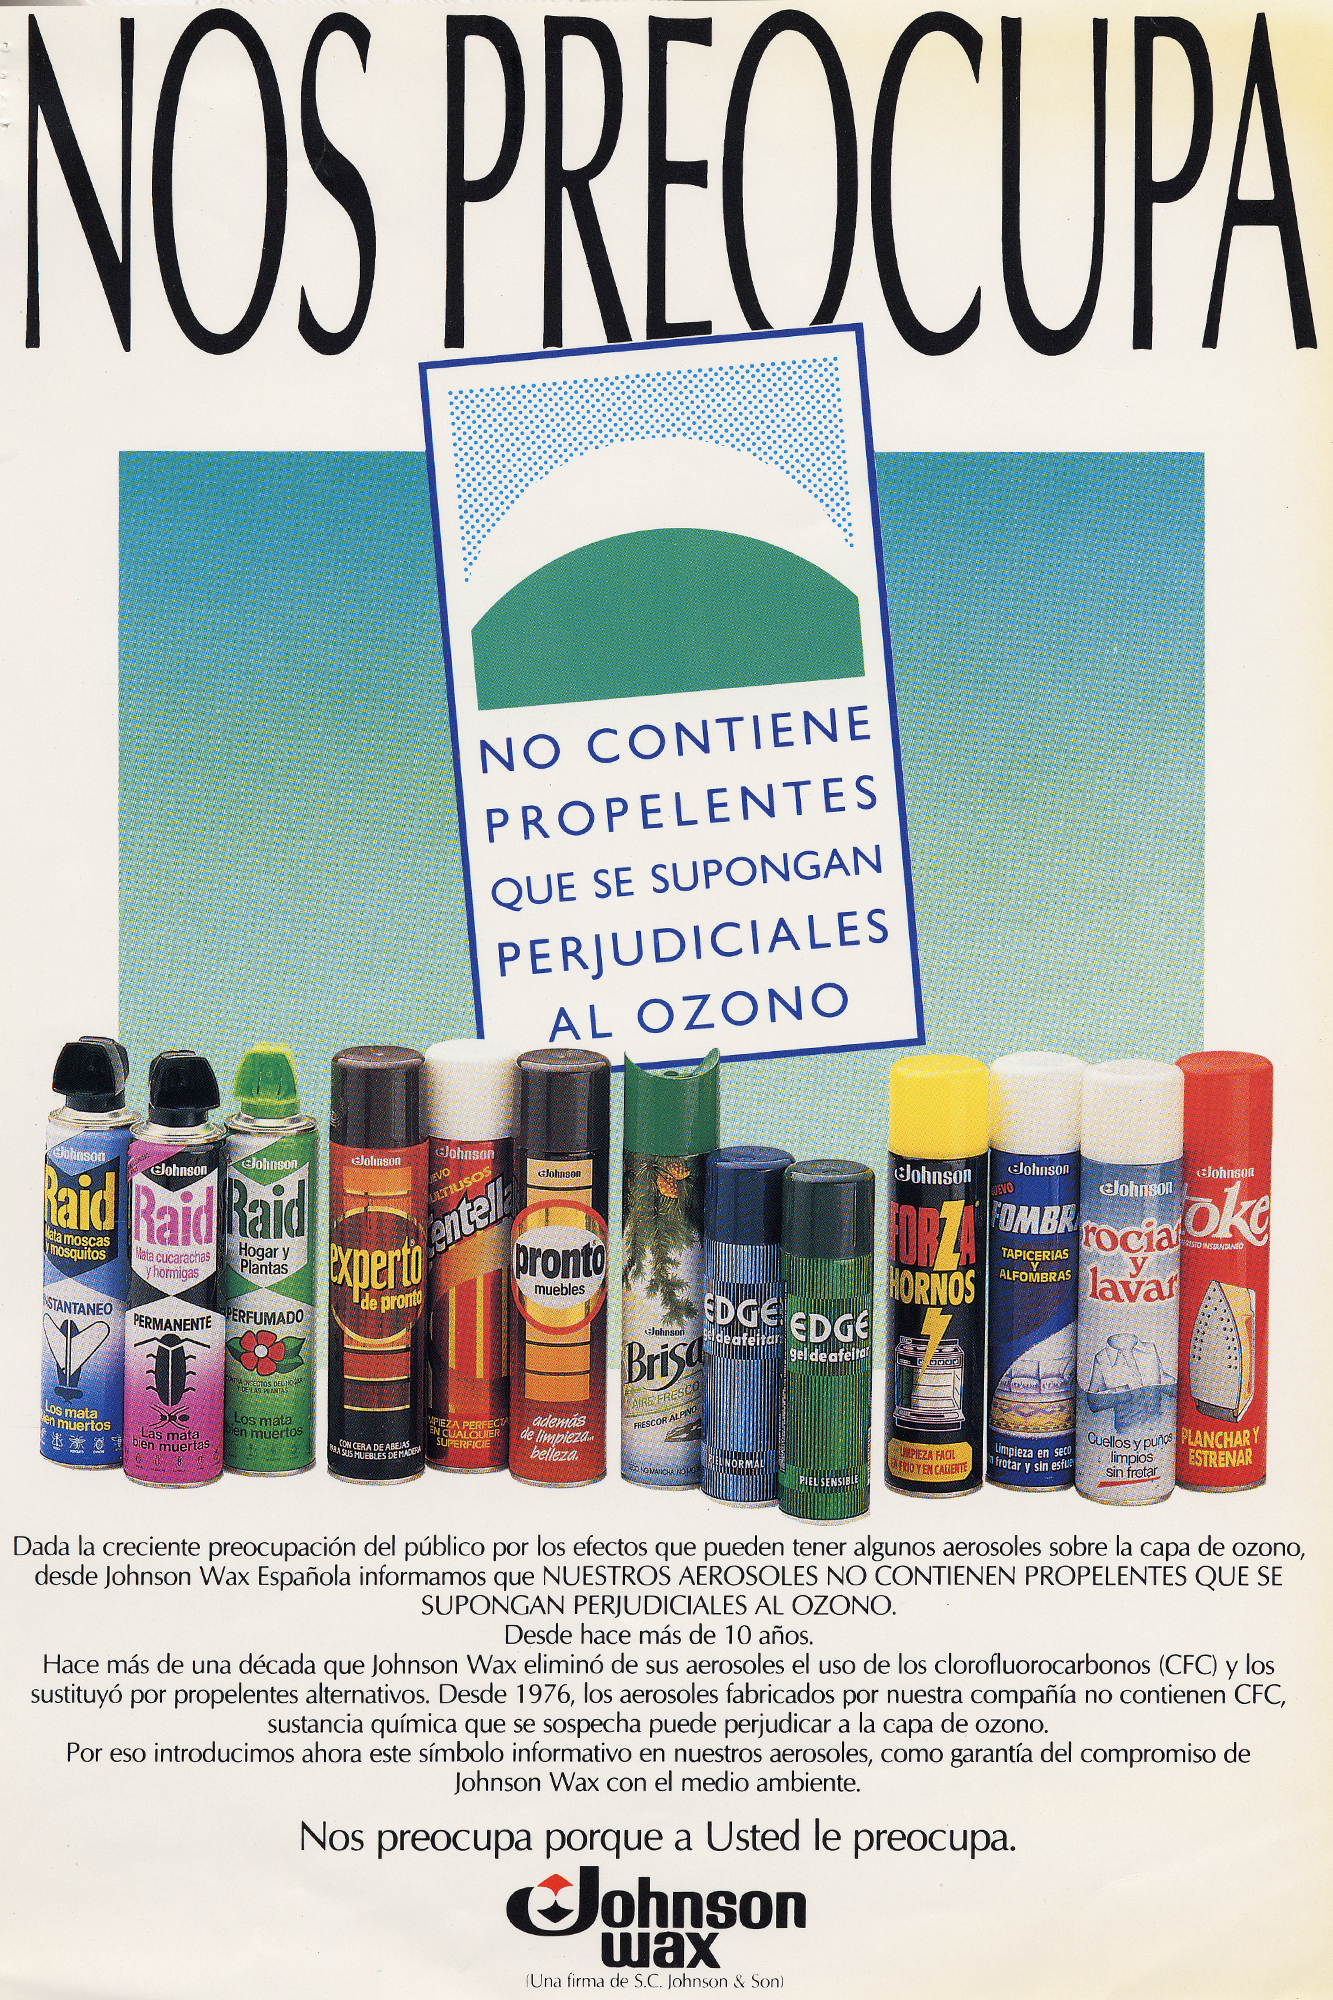 Johnson Wax ad explaining CFCs were removed from all products to be environmentally responsible.